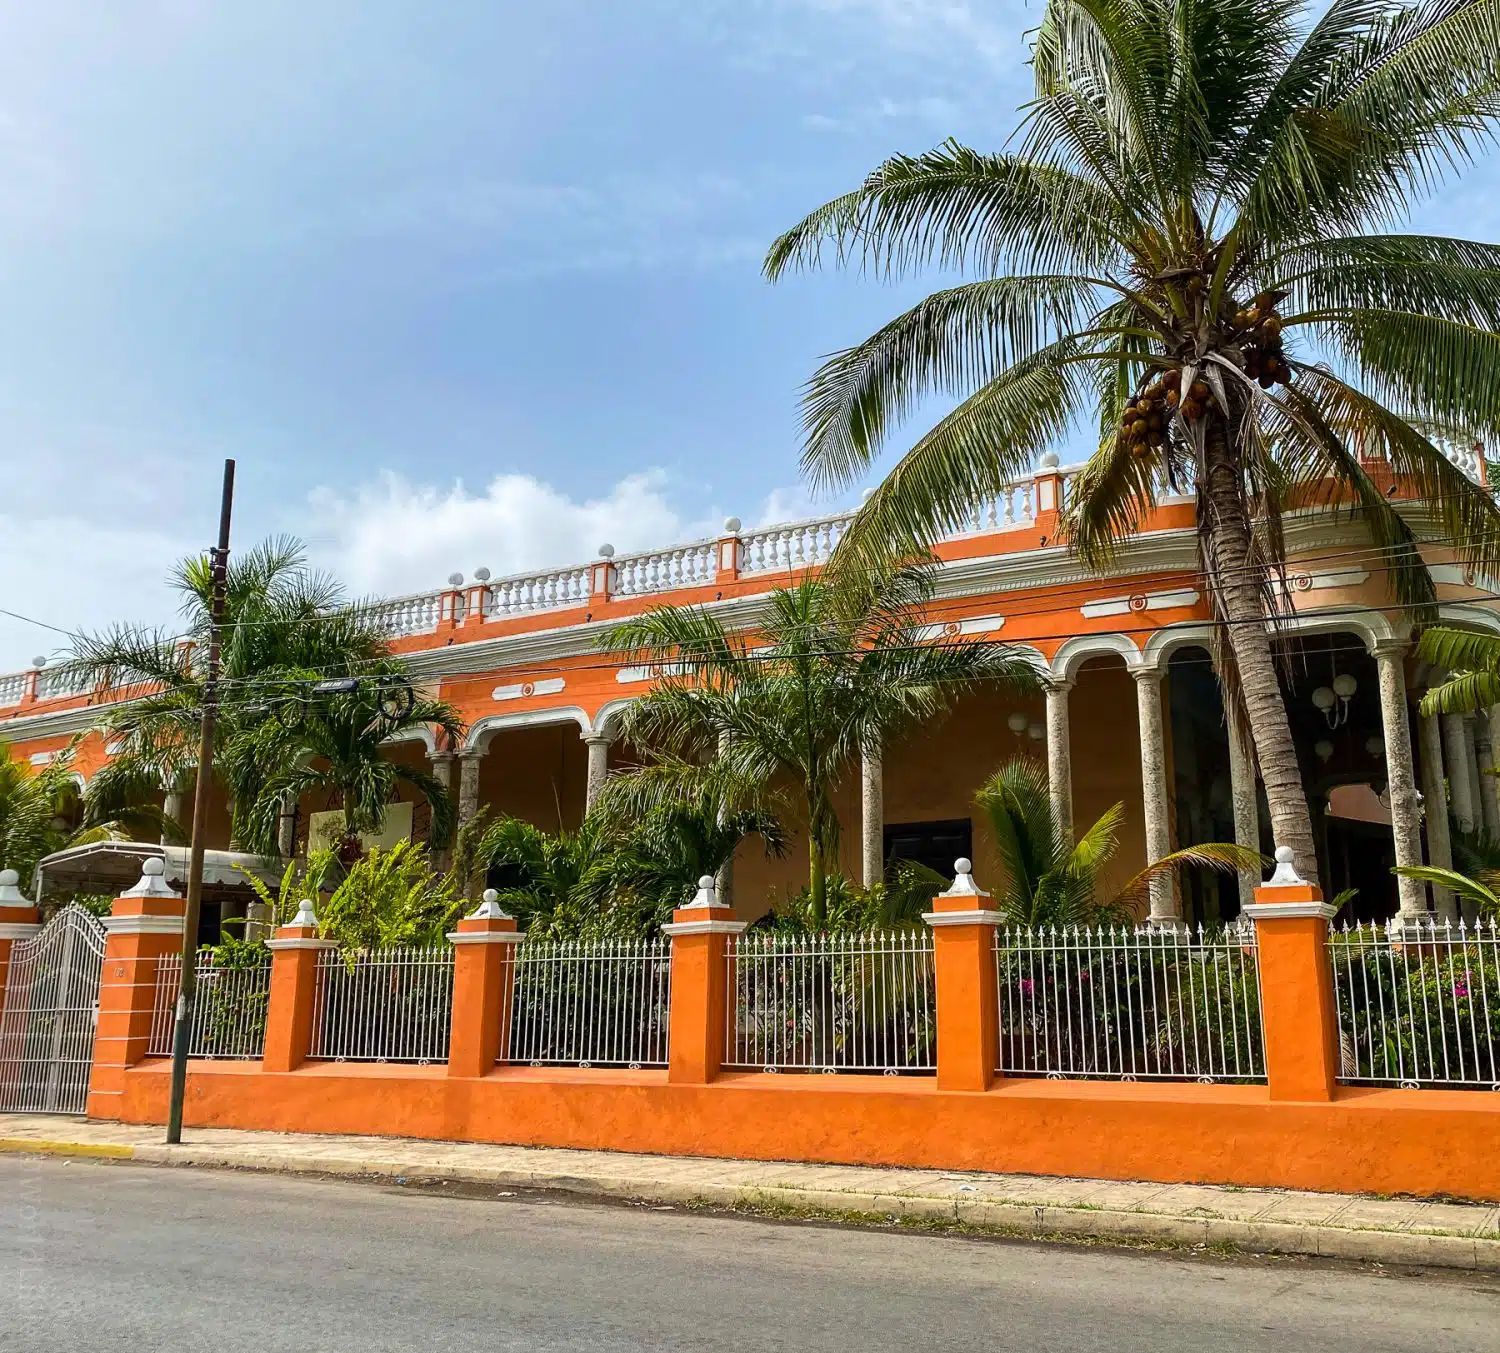 A bright orange building with palm trees.